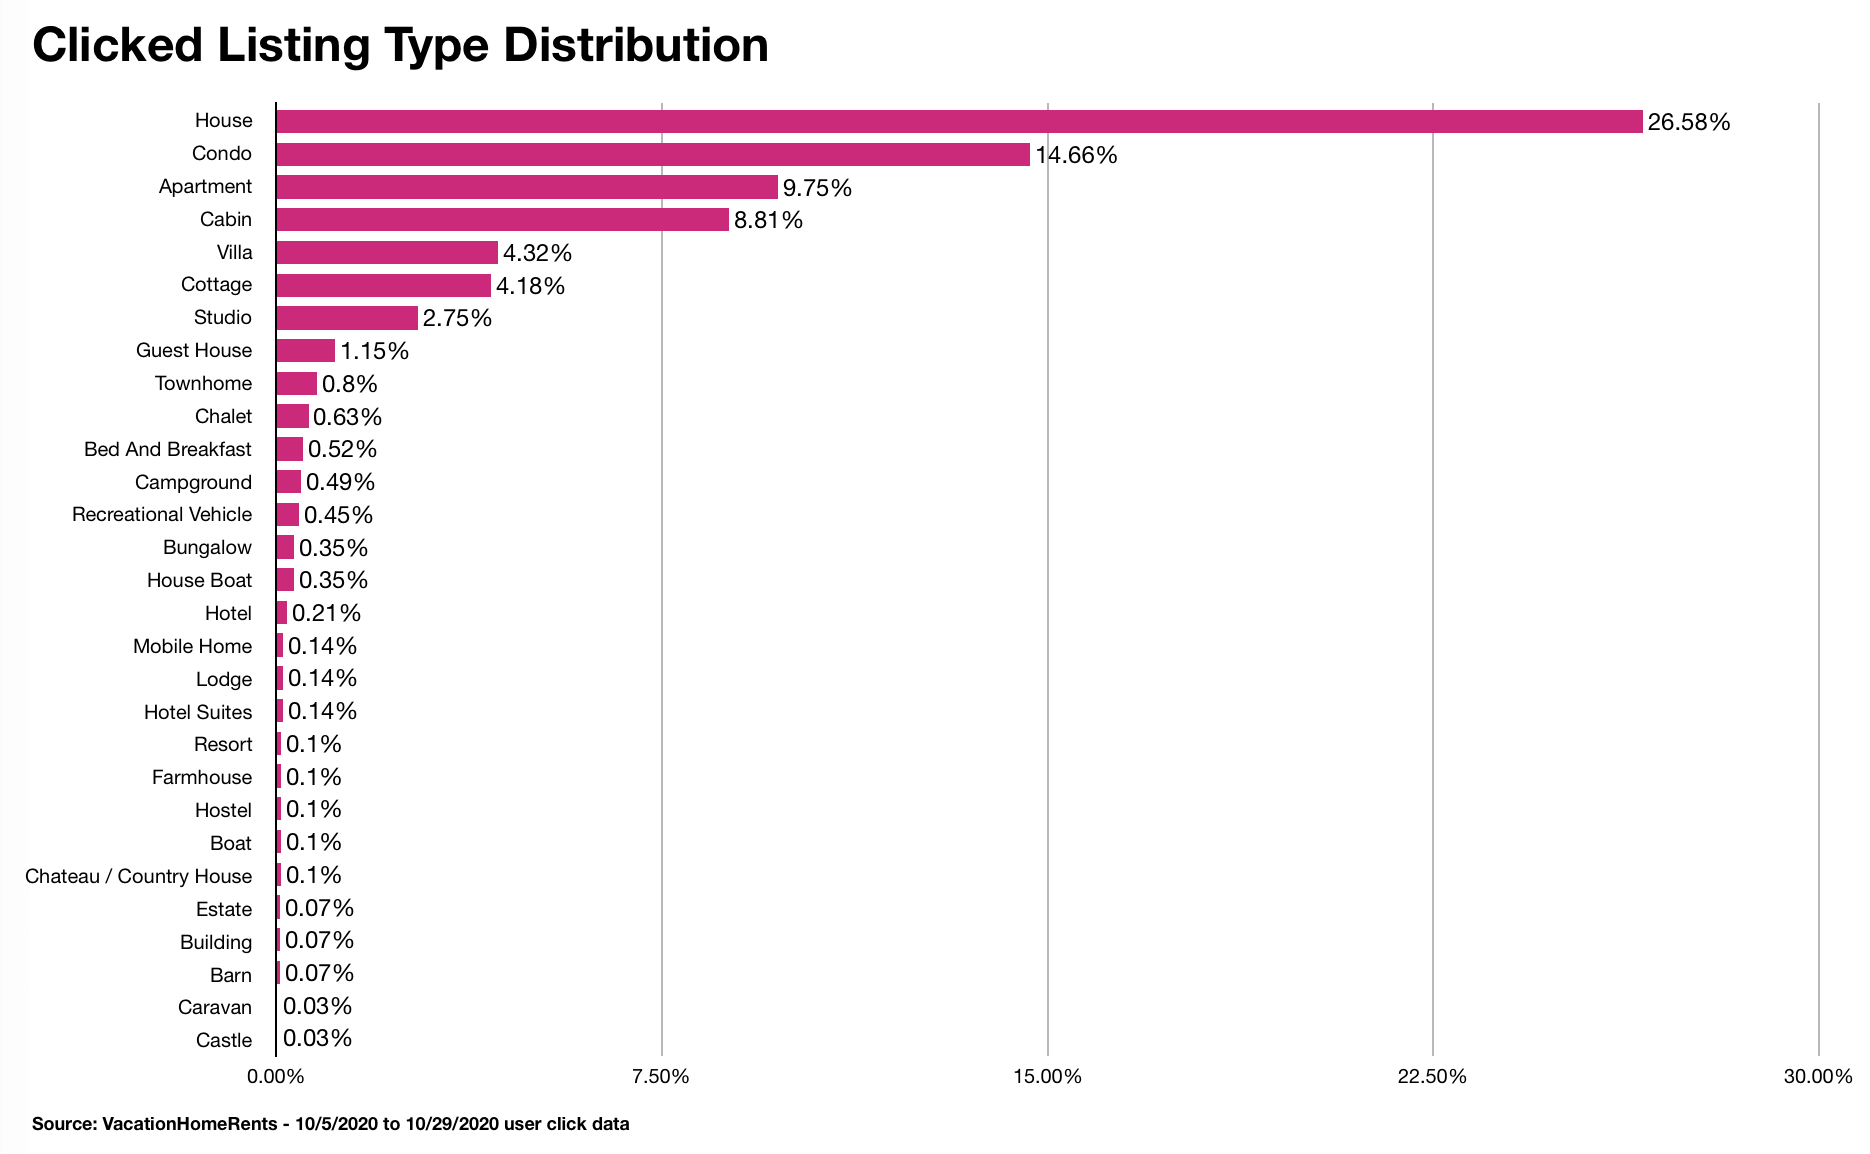 2020 Travel Trends Clicked Listing Type Distribution by VacationHomeRents.com